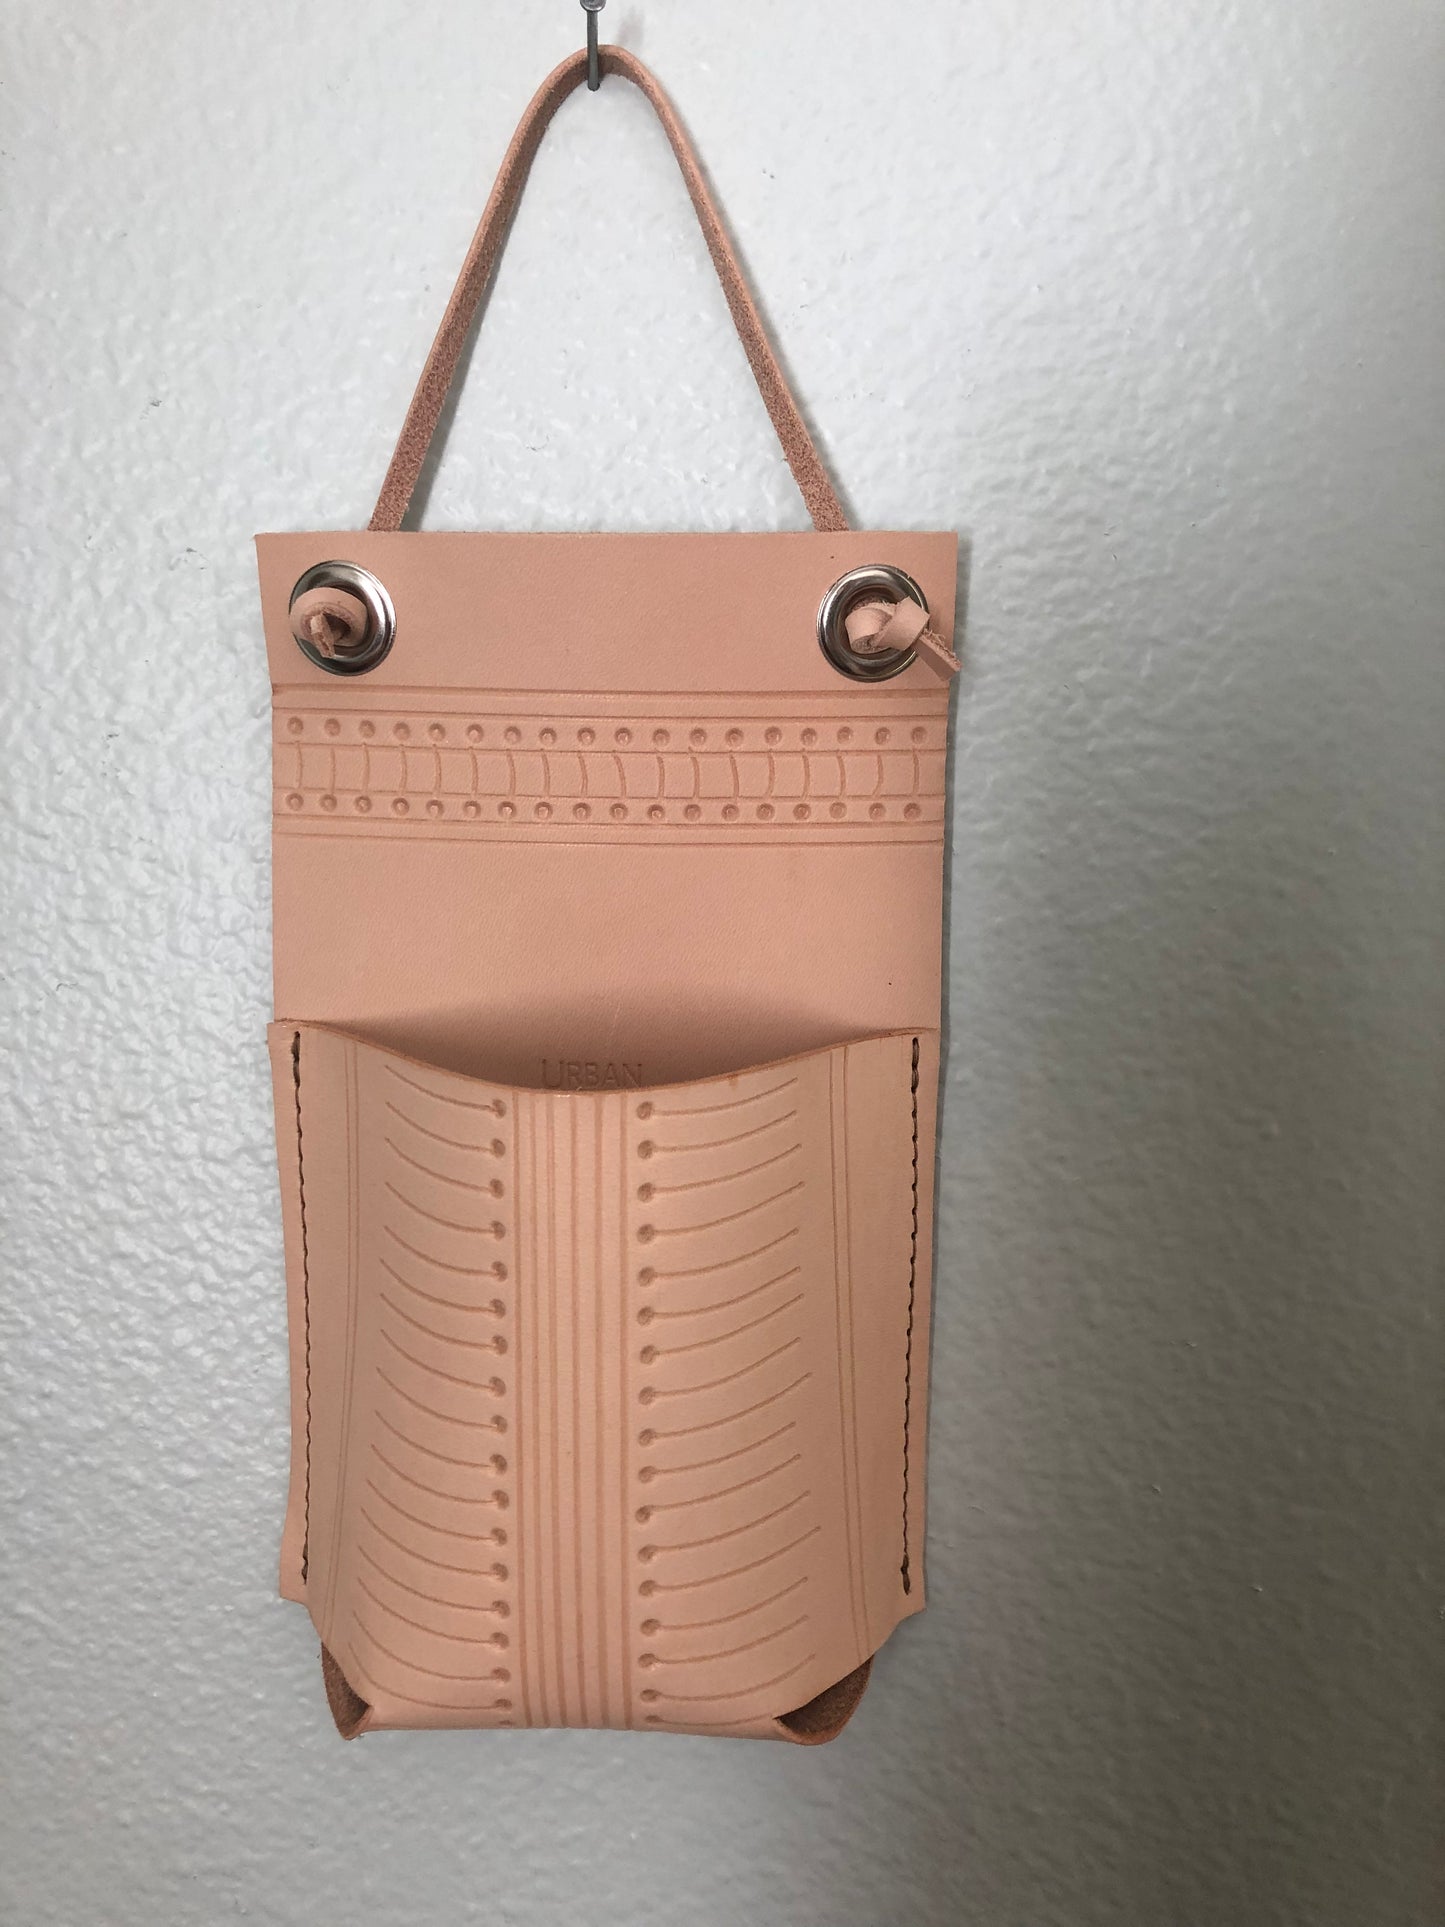 Patterned Leather Wall Pocket | Hanging Leather Wall Caddy | Hanging Storage